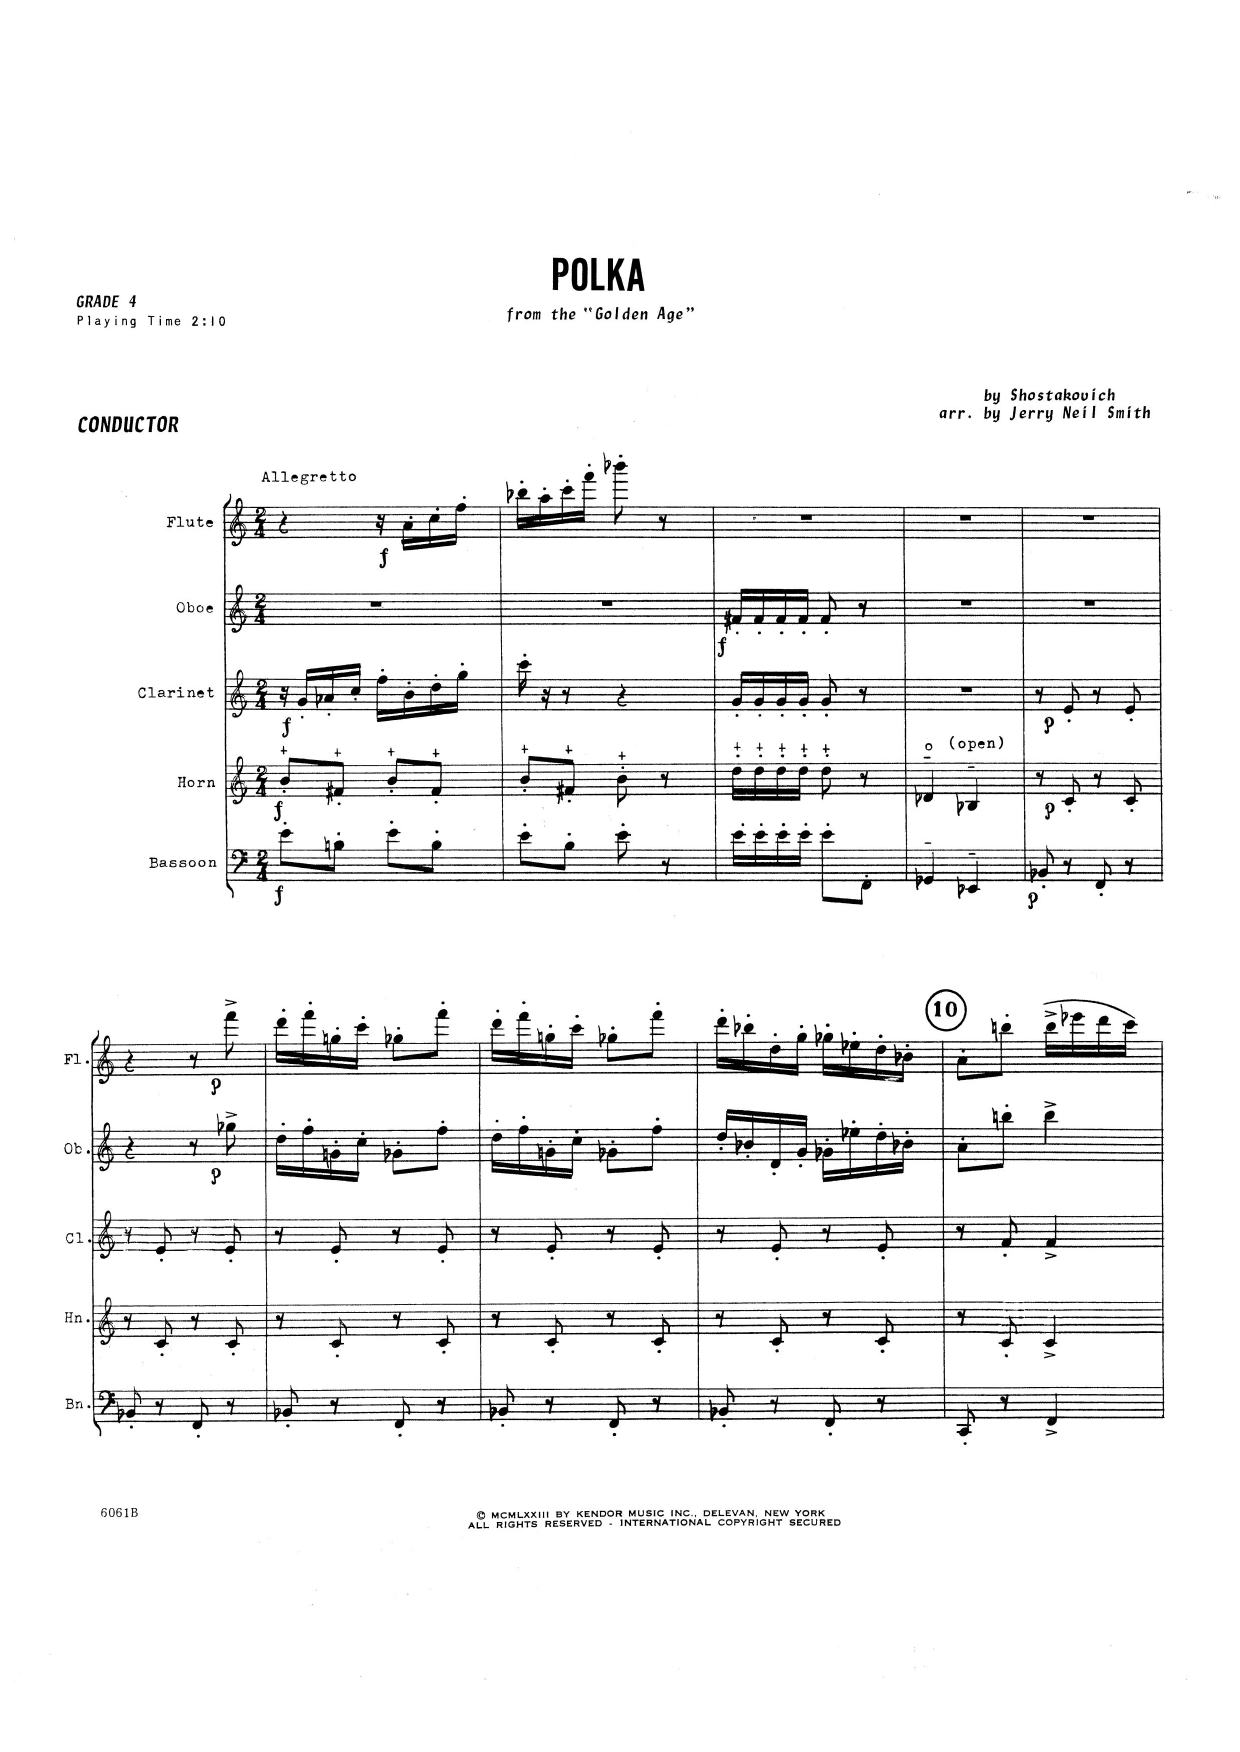 Download Jerry Smith Polka - Full Score Sheet Music